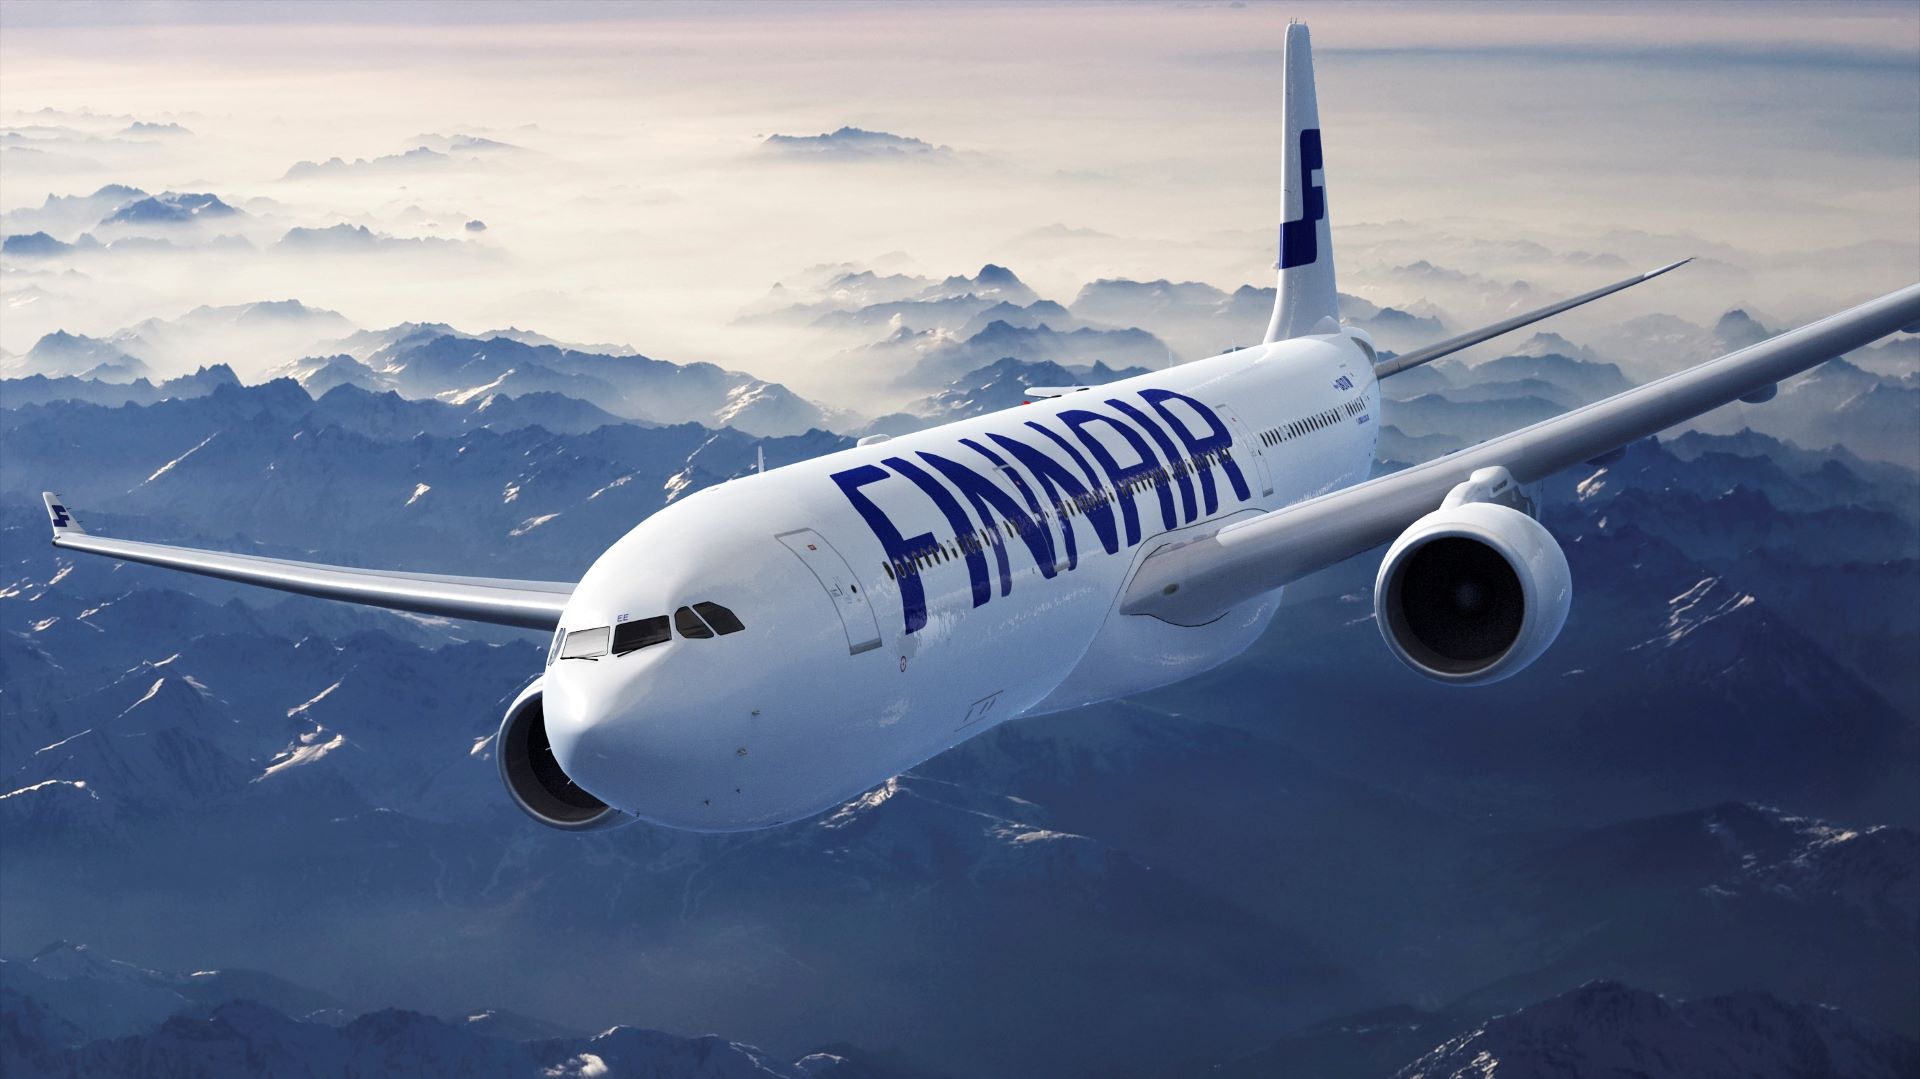 A white Finnair jet flying high above mountains, approaching camera.